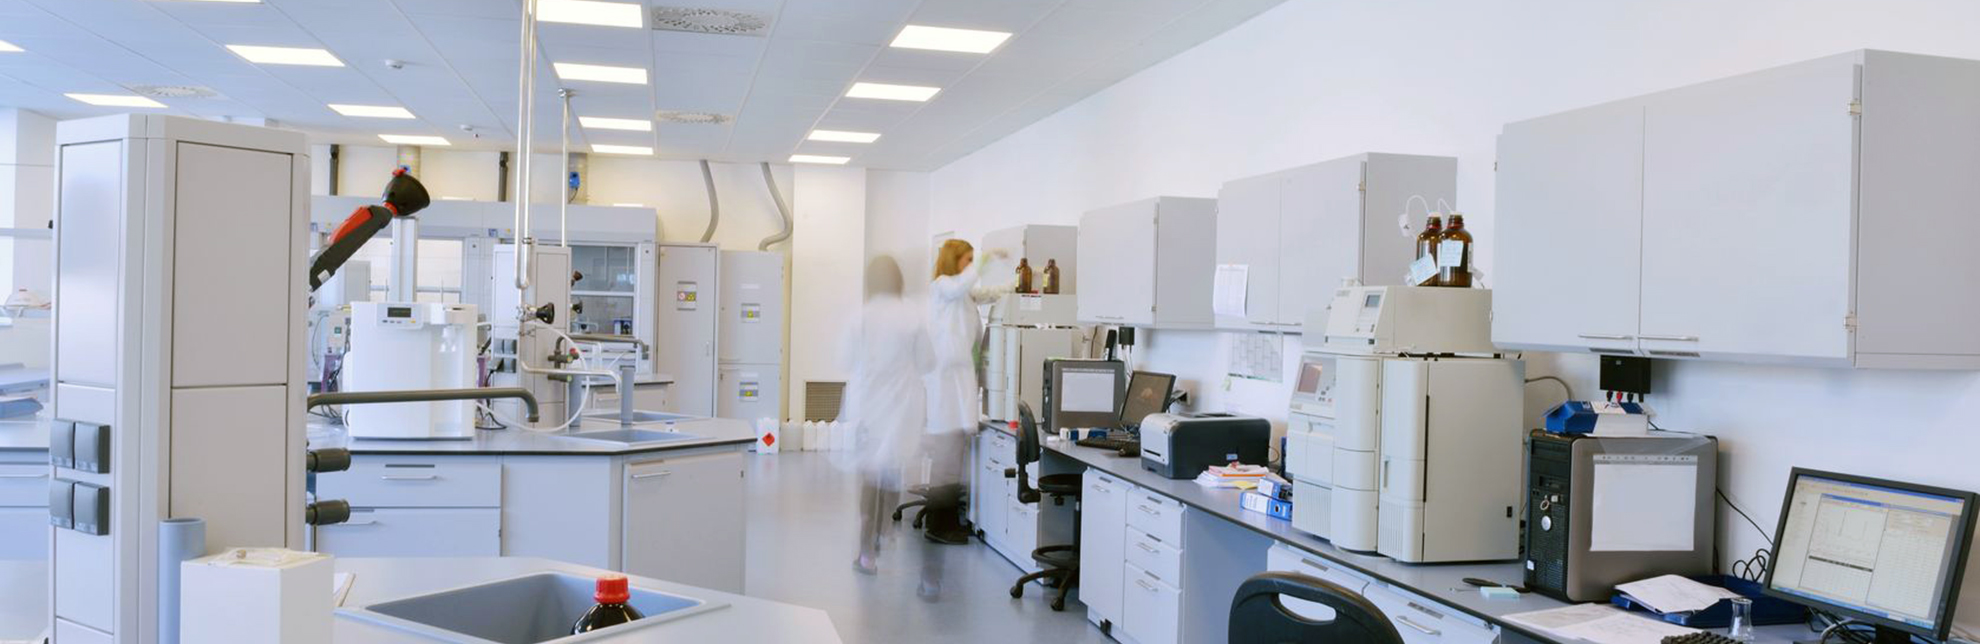 Refurbish your medical facilities to latest HTM Guidelines